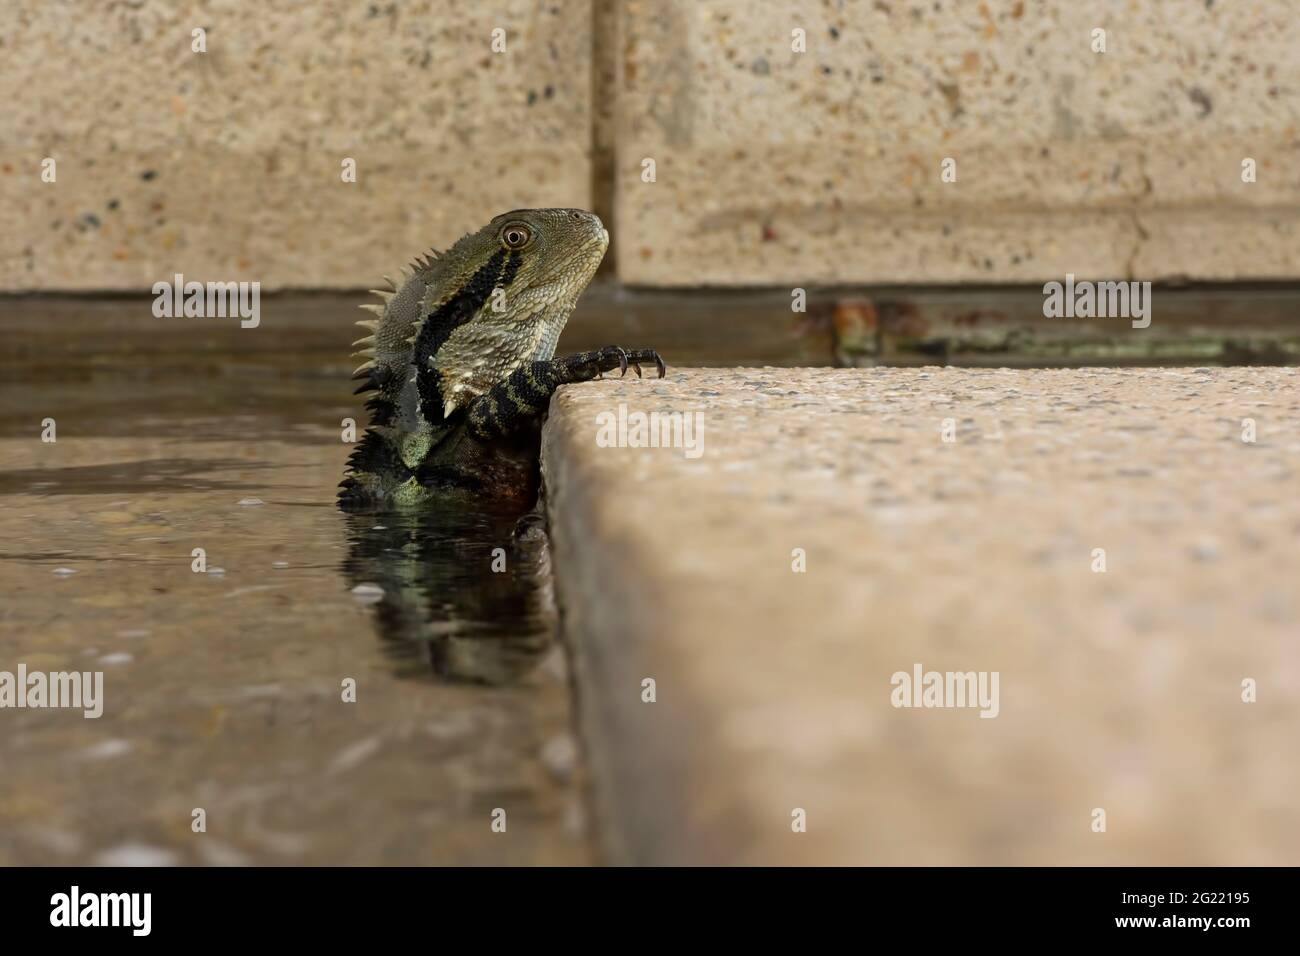 An Australian eastern water dragon lizard (Intellagama lesueurii) has retreated to the water of a city fountain when people approach. Stock Photo